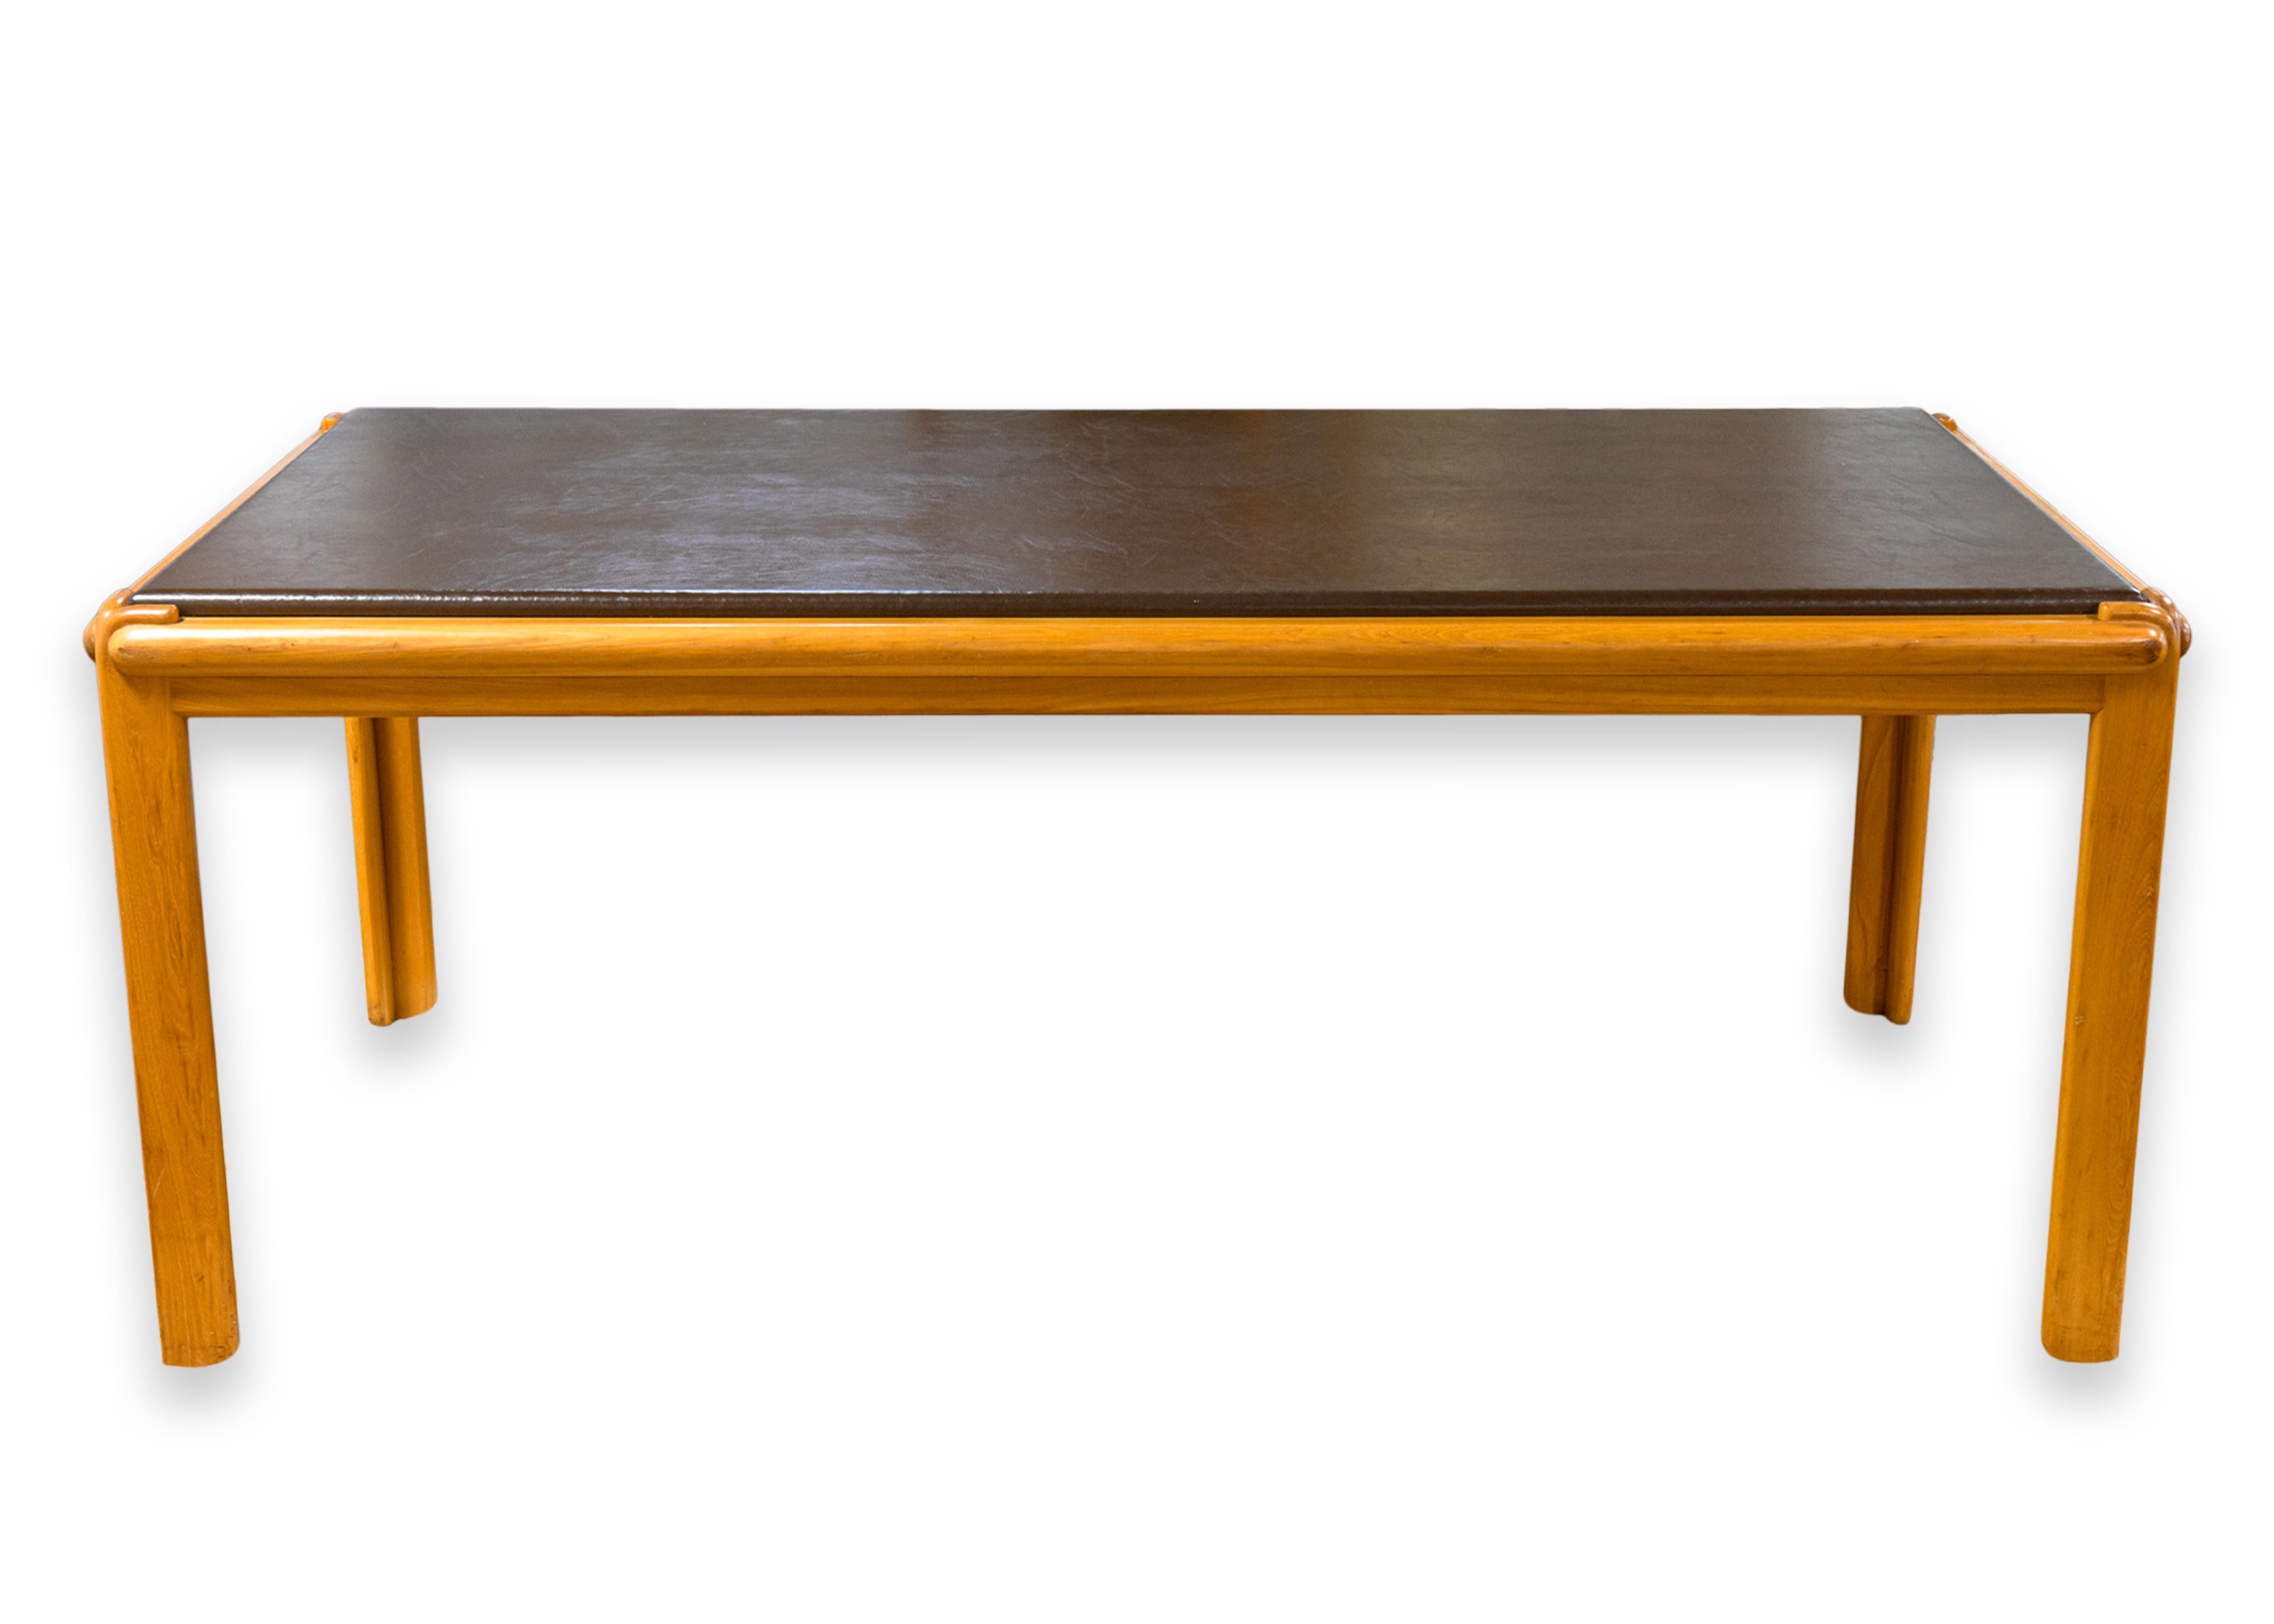 A classic minimal dining table or conference table designed by Ralph Rye Table Group for Thonet. Model 879.100 manufactured in 1977. Retains original Thonet Industries Inc. label on underside of table. Solid elm frame with deep brown vinyl top.